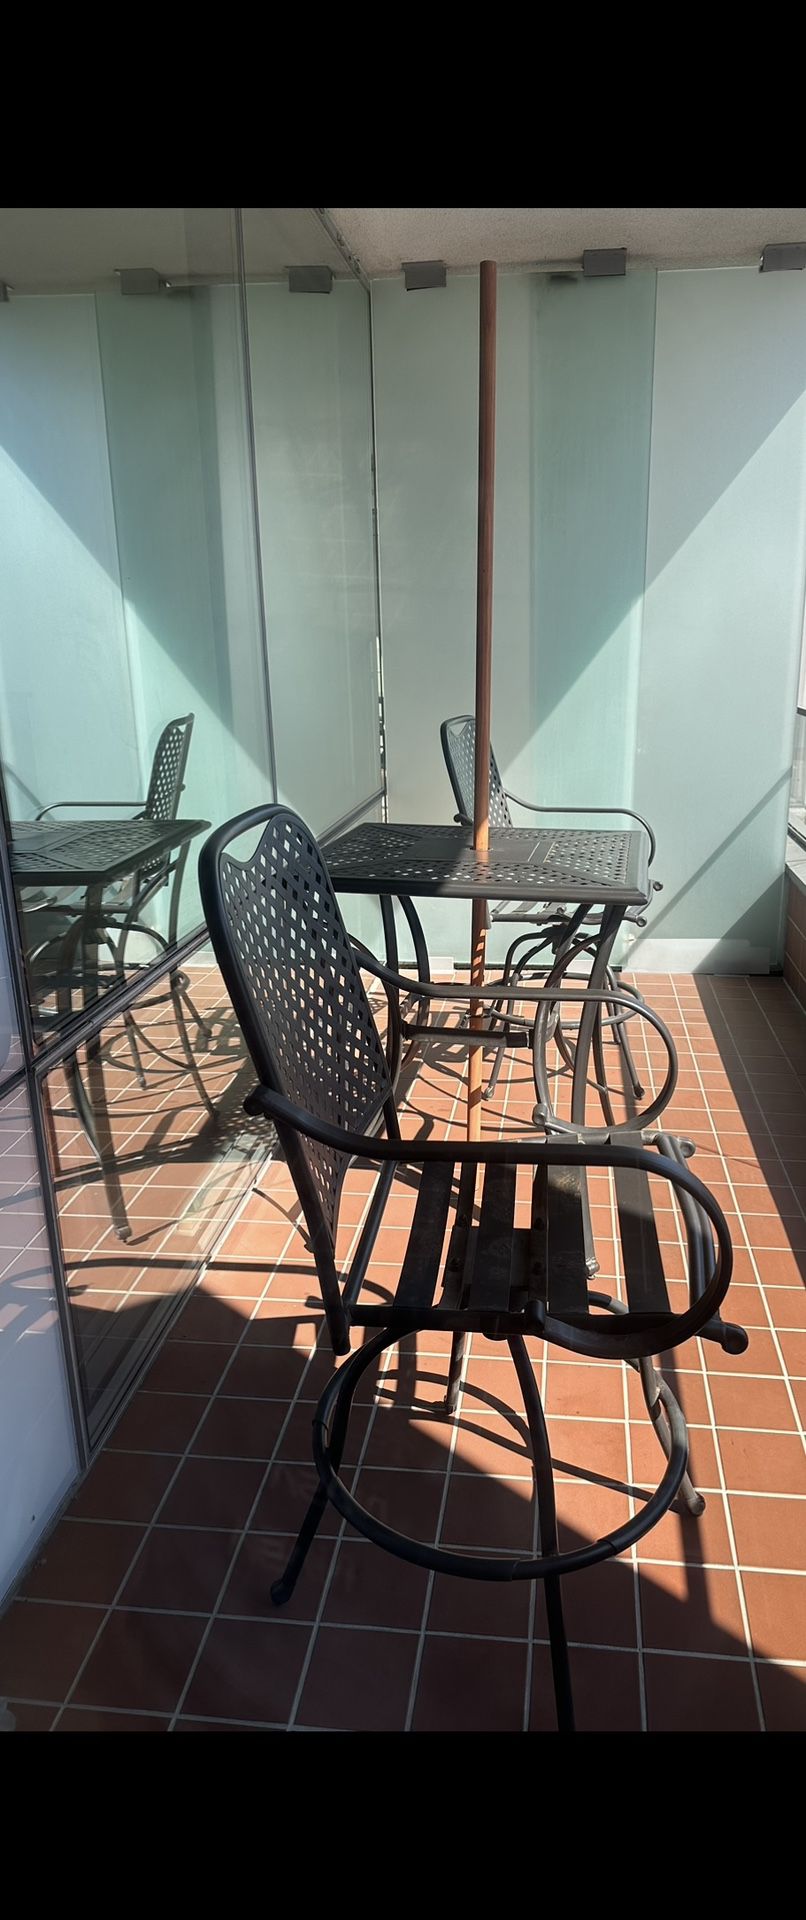 2 High Top Chairs With Table And Umbrella Pole